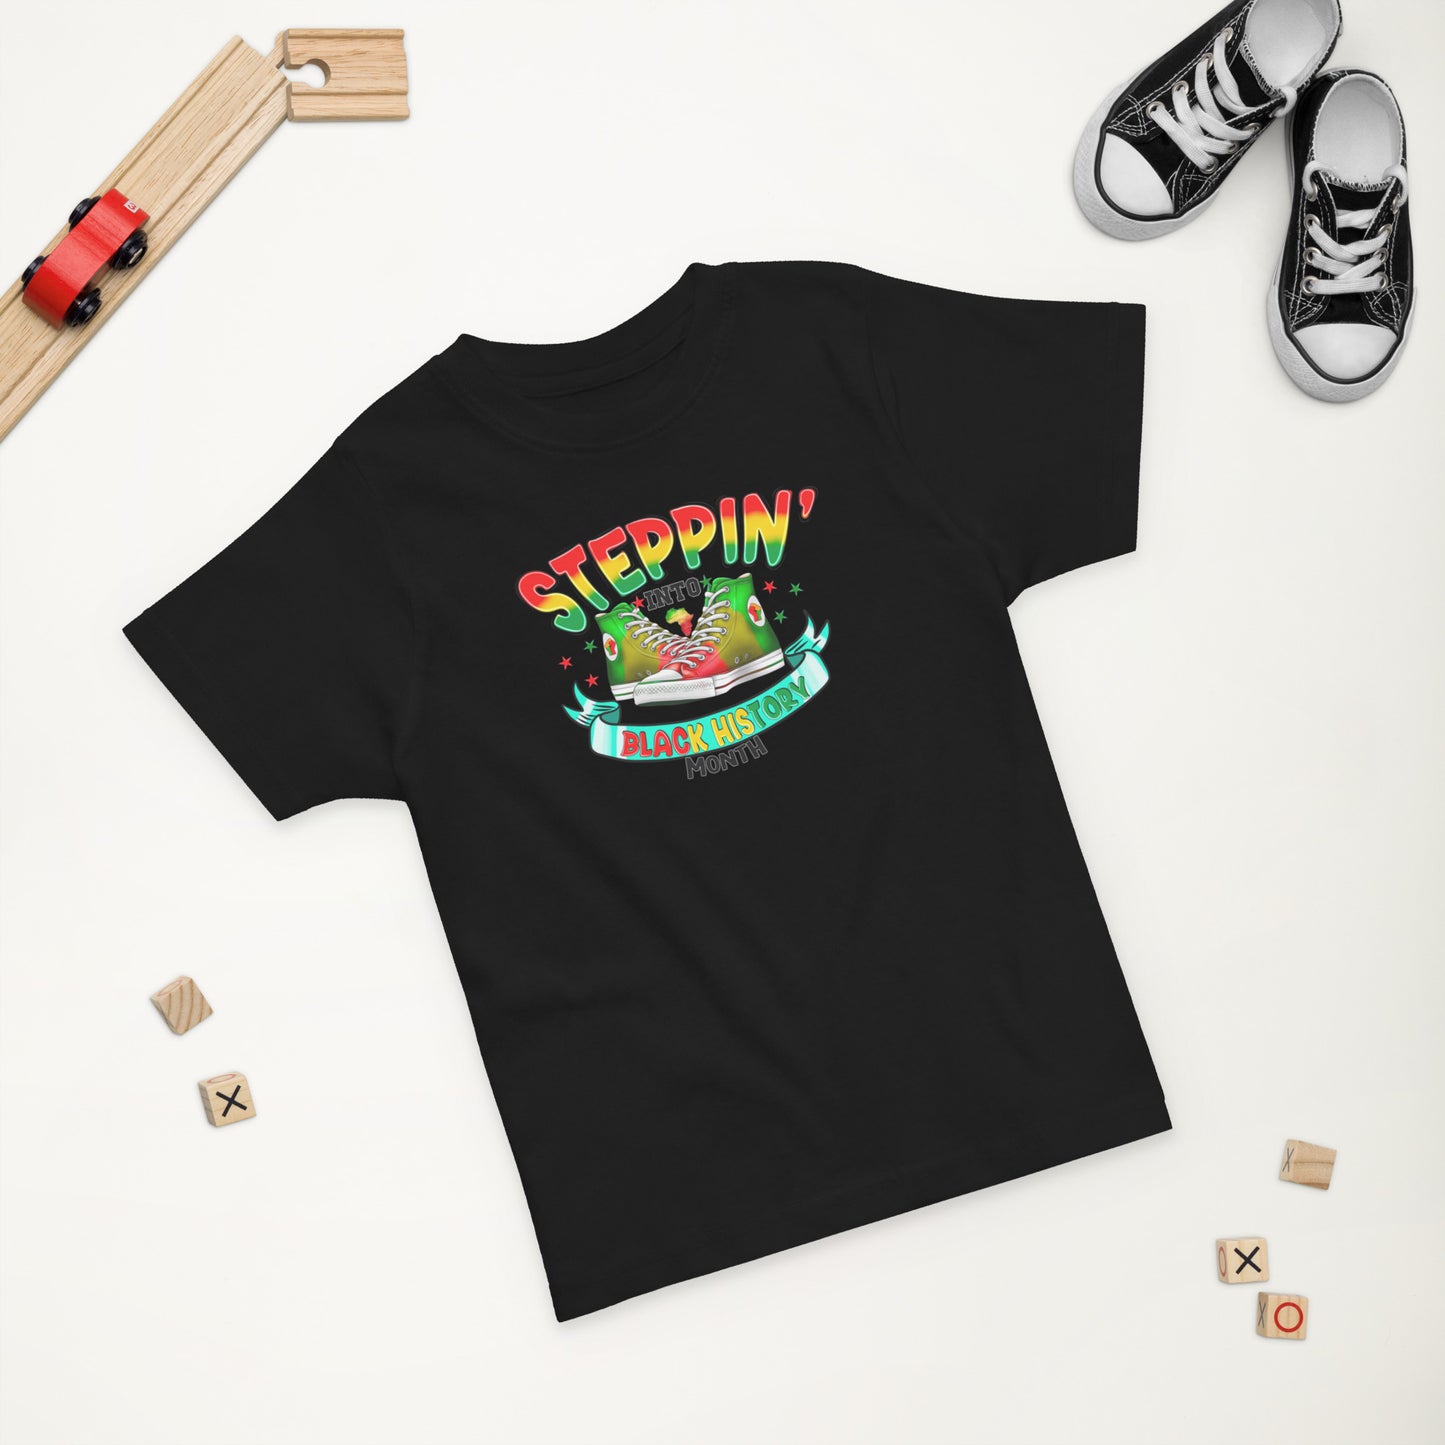 Toddler jersey t-shirt - Steppin Into Black History Month